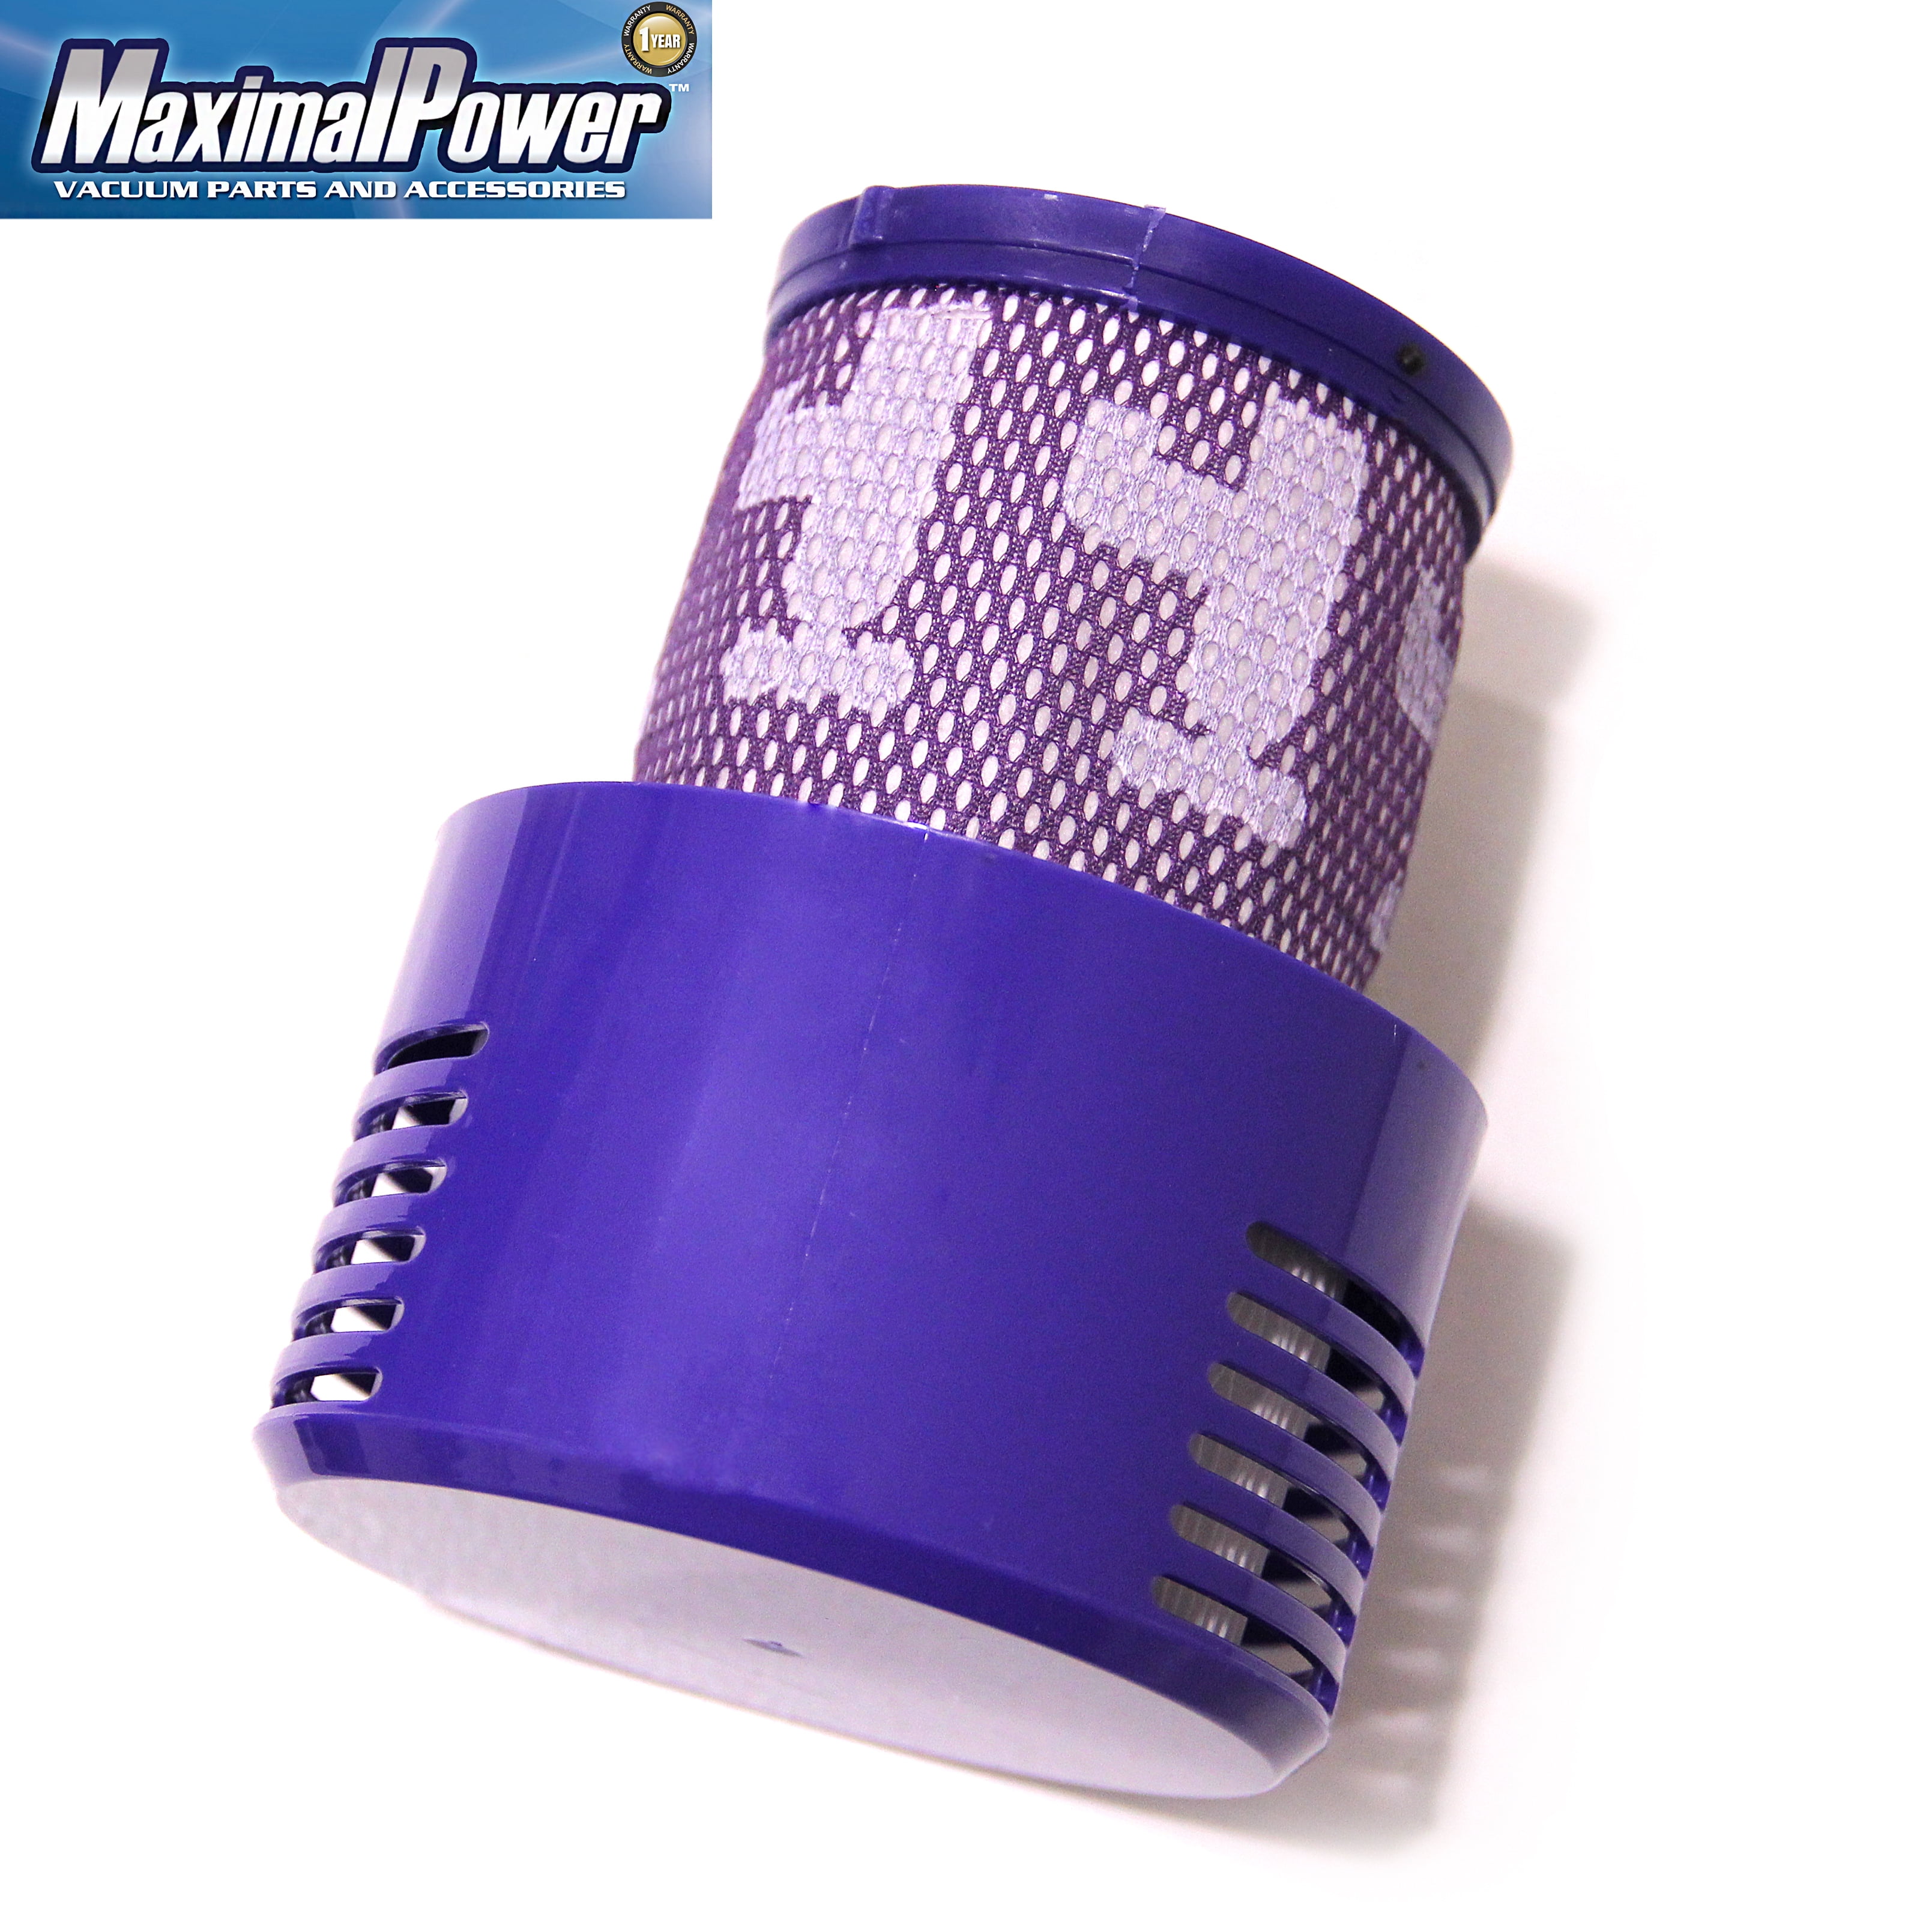 Replace for Dyson V10 Filter Cyclone & Animal Series, #969082-01